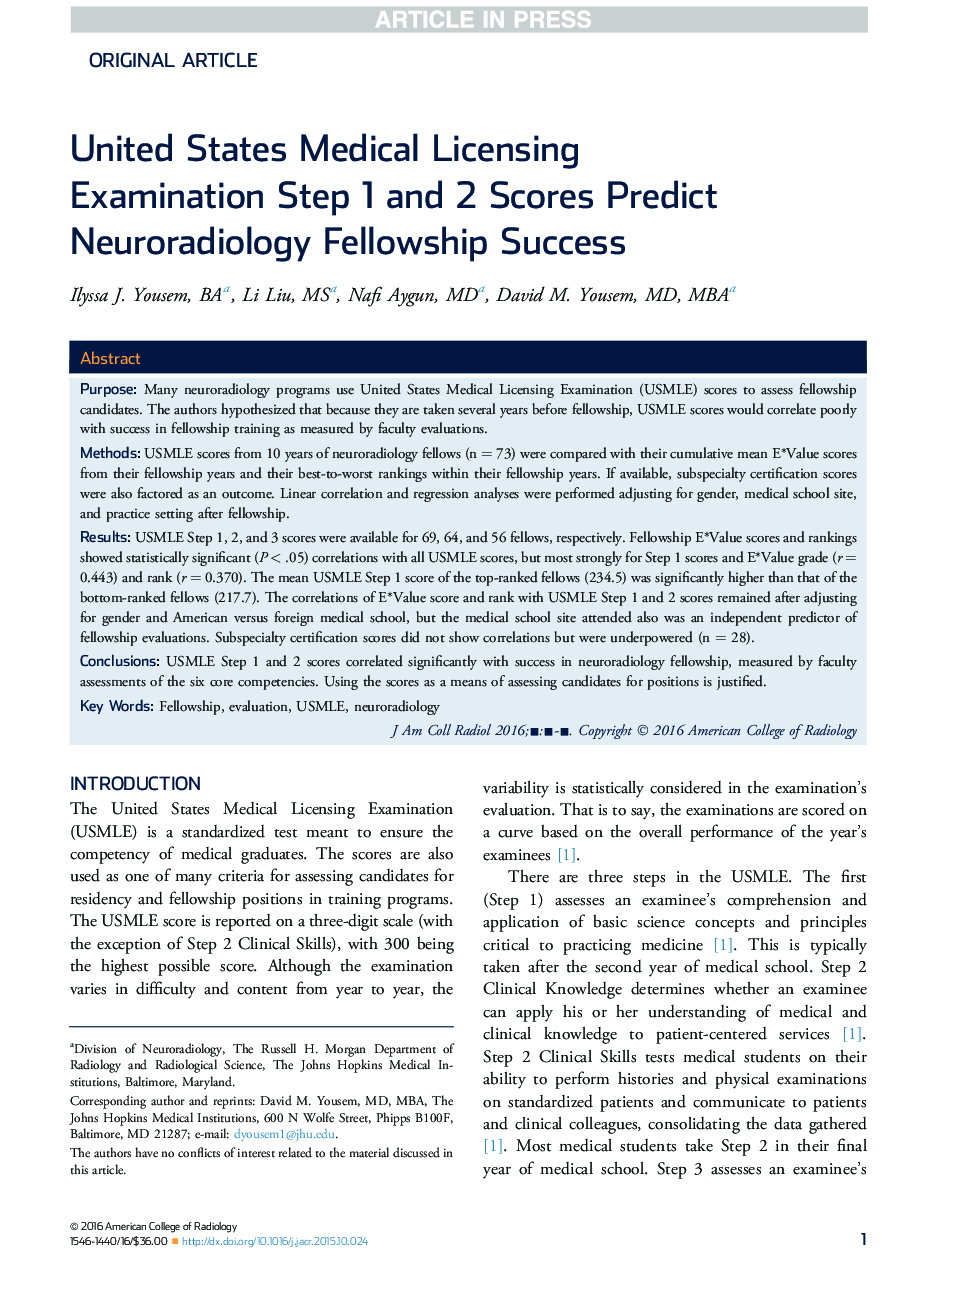 United States Medical Licensing Examination Step 1 and 2 Scores Predict Neuroradiology Fellowship Success